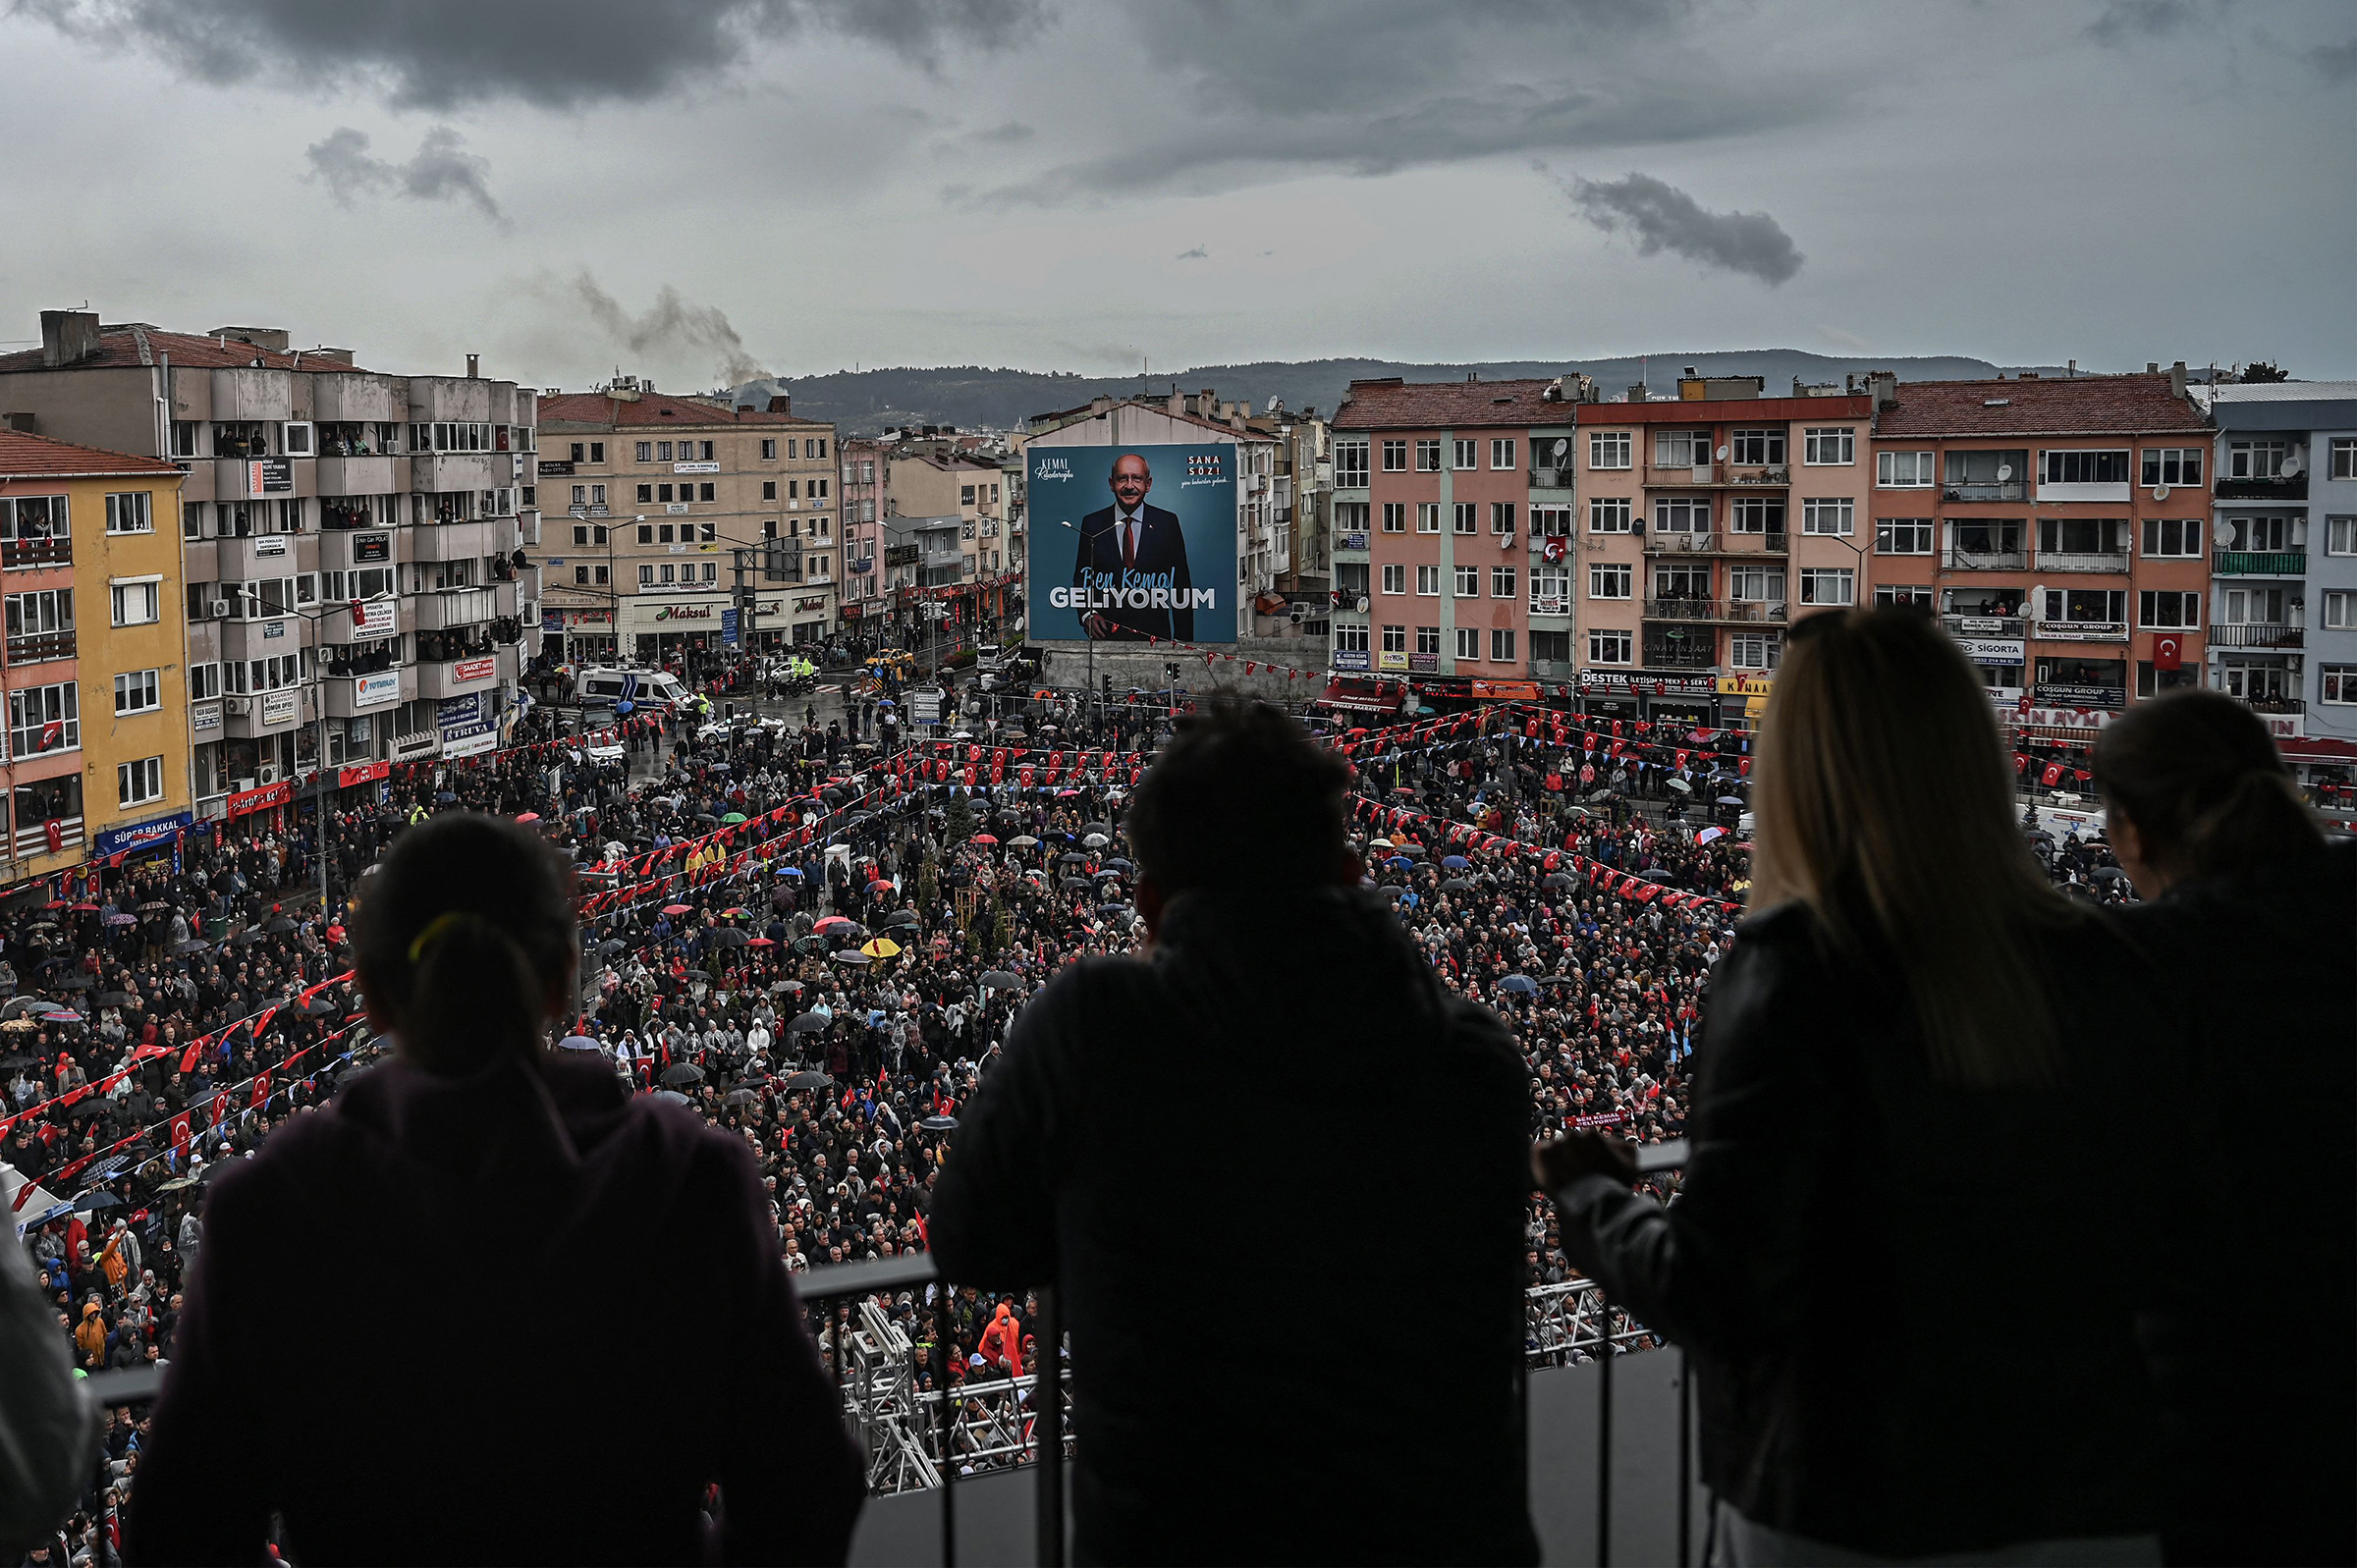 With a sea of supporters with umbrellas and hoods at his feet in Canakkale, western Turkey, on April 11, Kılıçdaroğlu, who will challenge Recep Tayyip Erdogan at the polls in May, smilingly promises "the return of spring." (Ozan Kose—AFP/Getty Images)